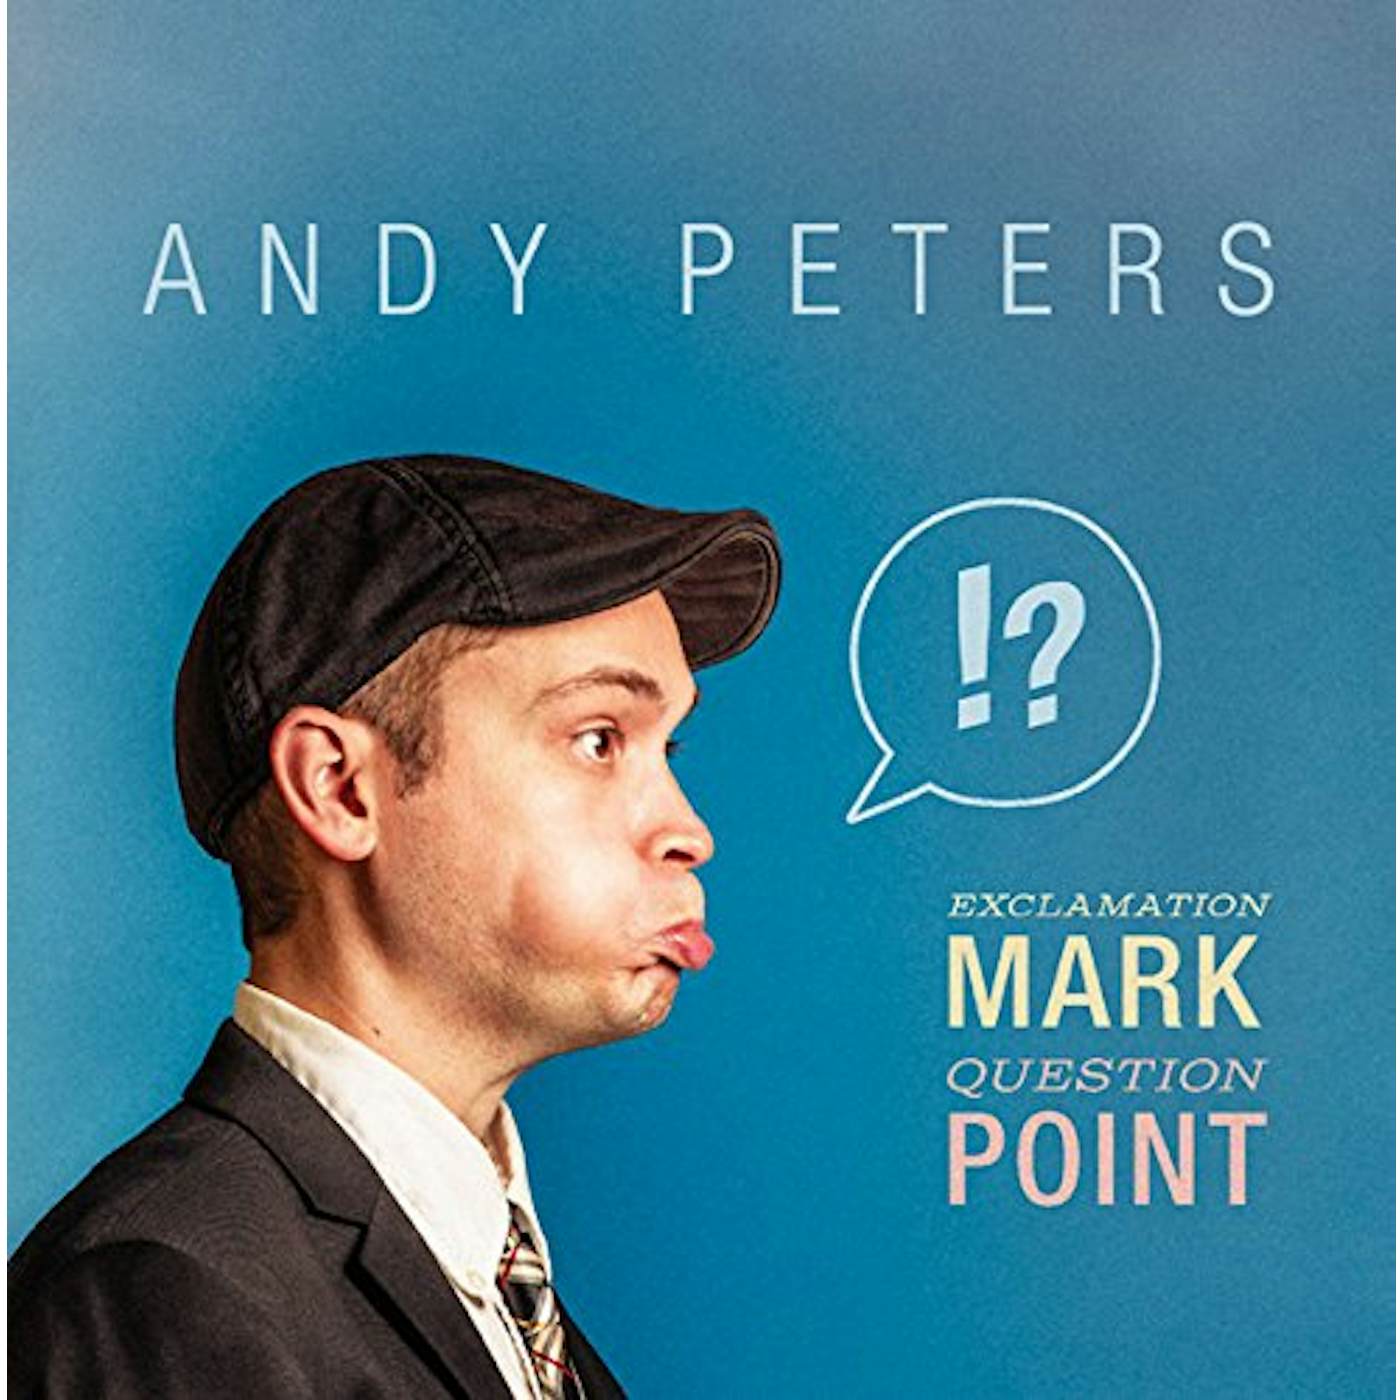 Andy Peters Exclamation Mark Question Point Vinyl Record